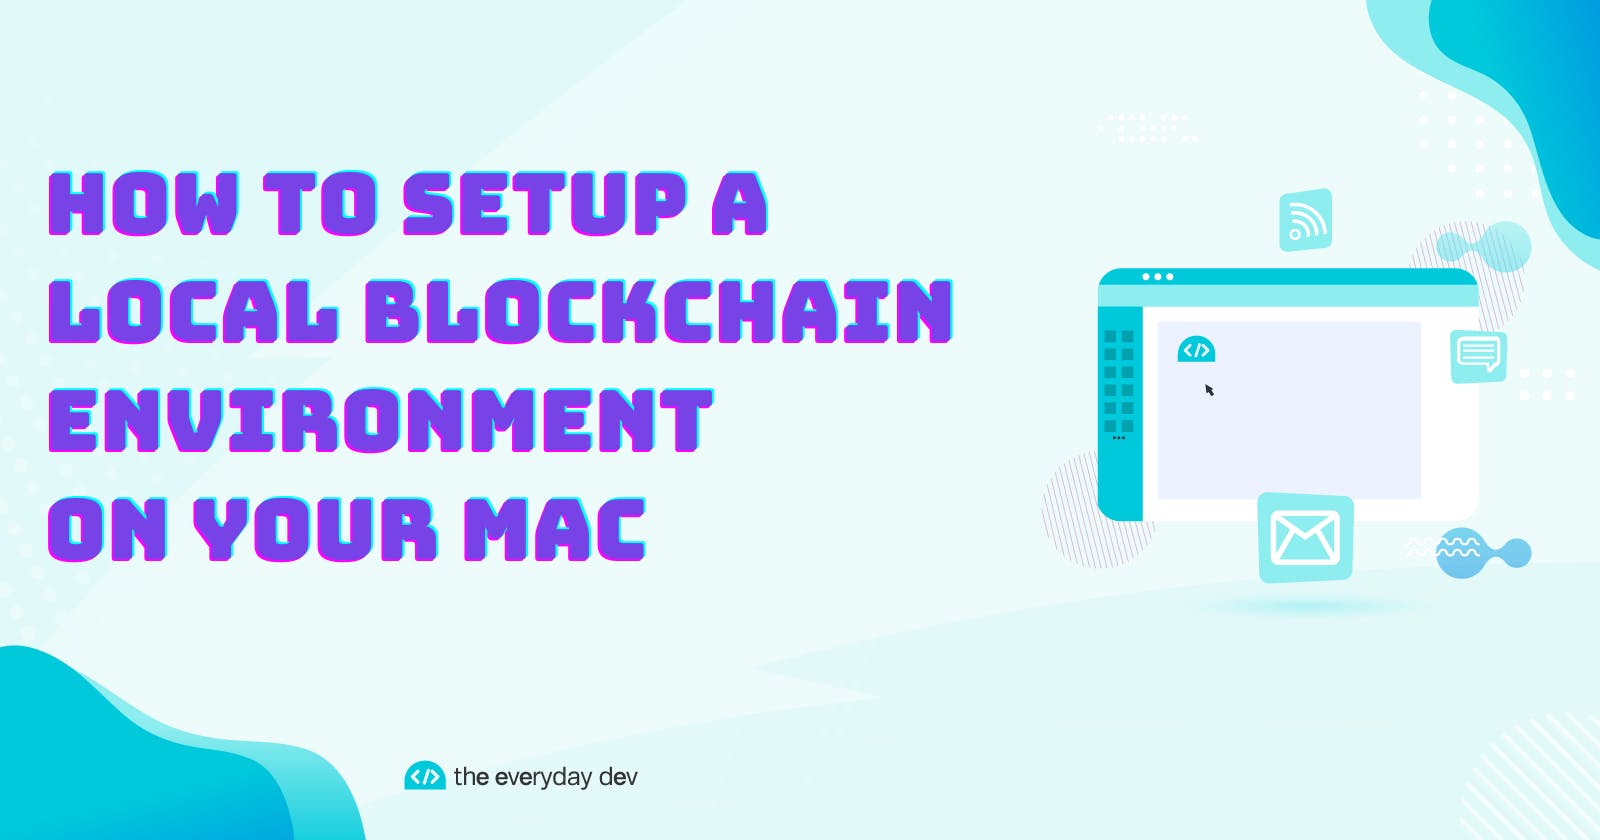 How to set up a local blockchain environment on your Mac